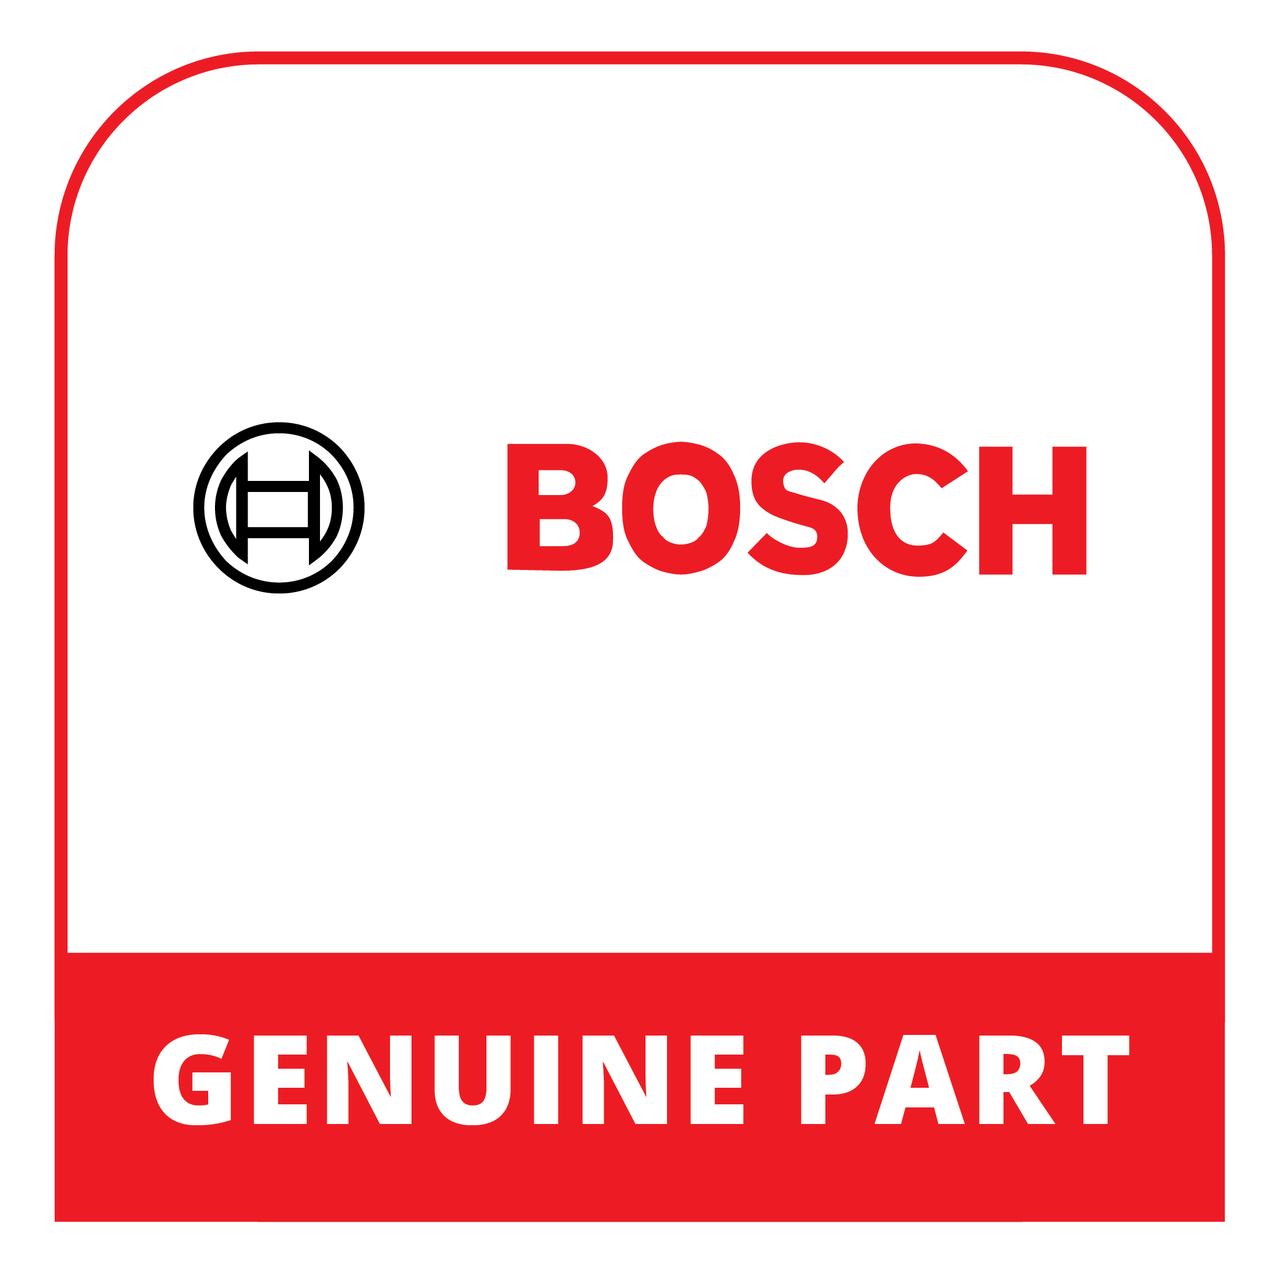 Bosch (Thermador) 11032345 - Burner Pipe - Genuine Bosch (Thermador) Part